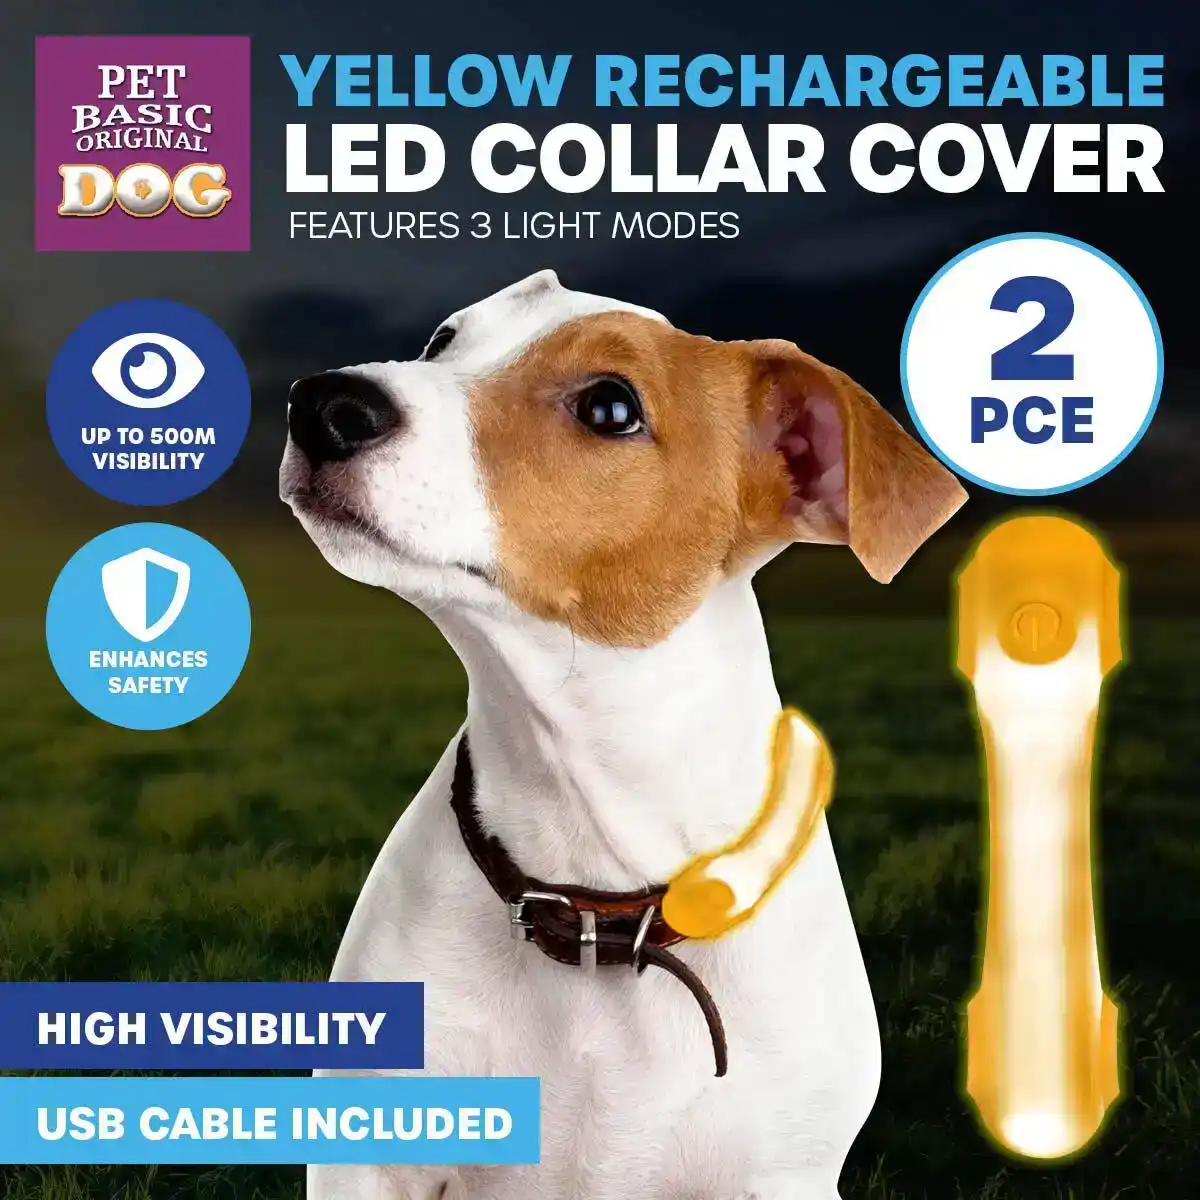 Pet Basic® 2PCE Rechargeable LED Dog Collar Cover Grey High Visibility Safe